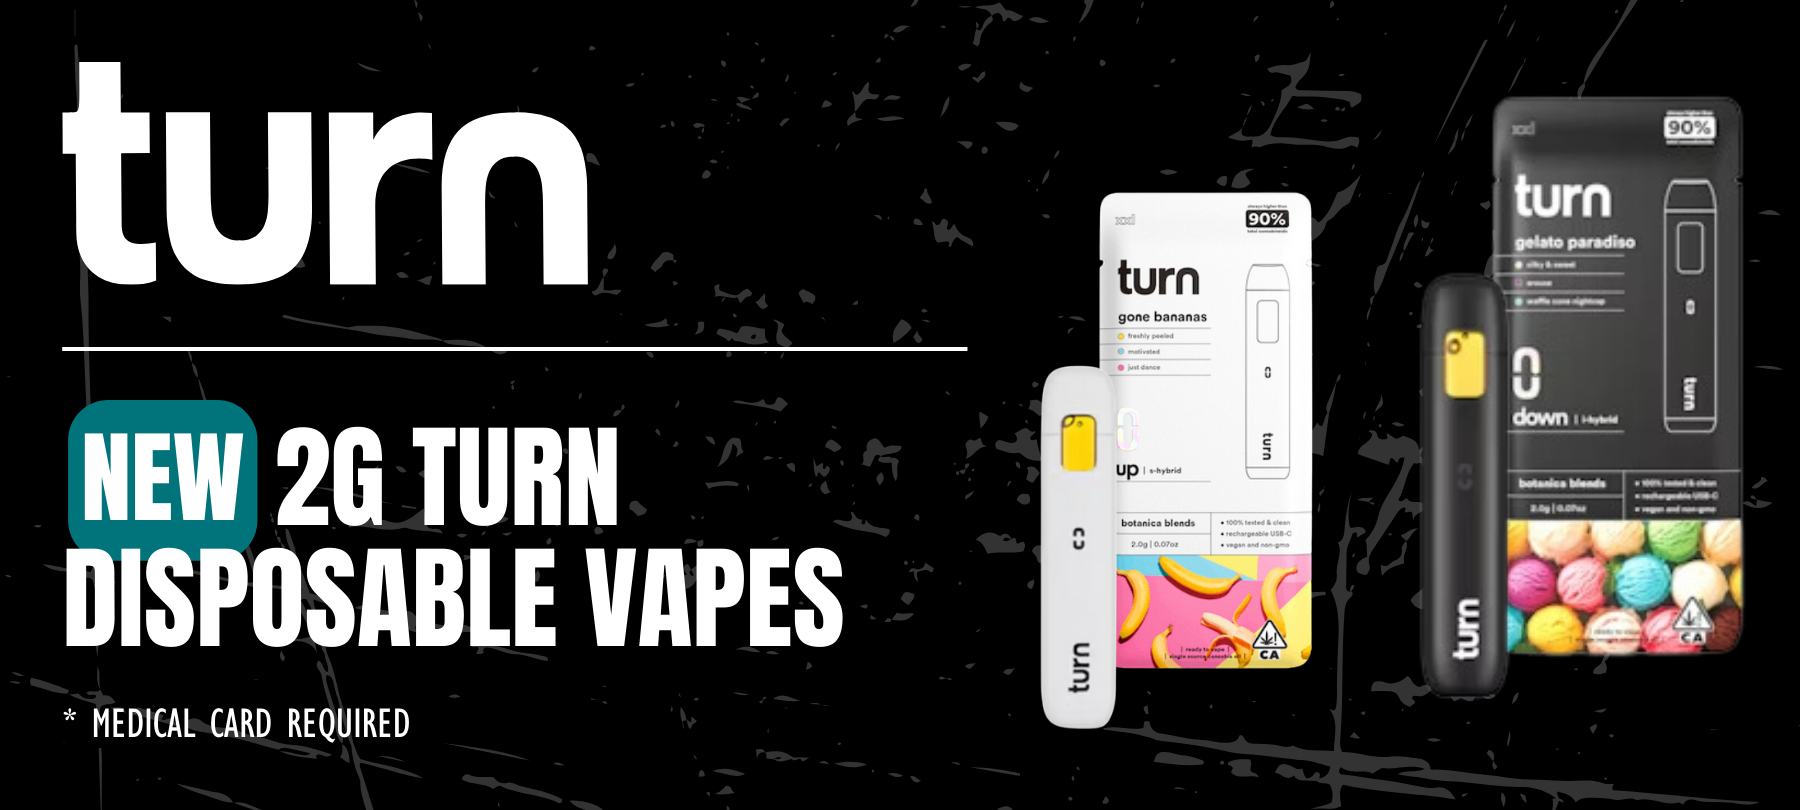 New 2g Vapes from Turn